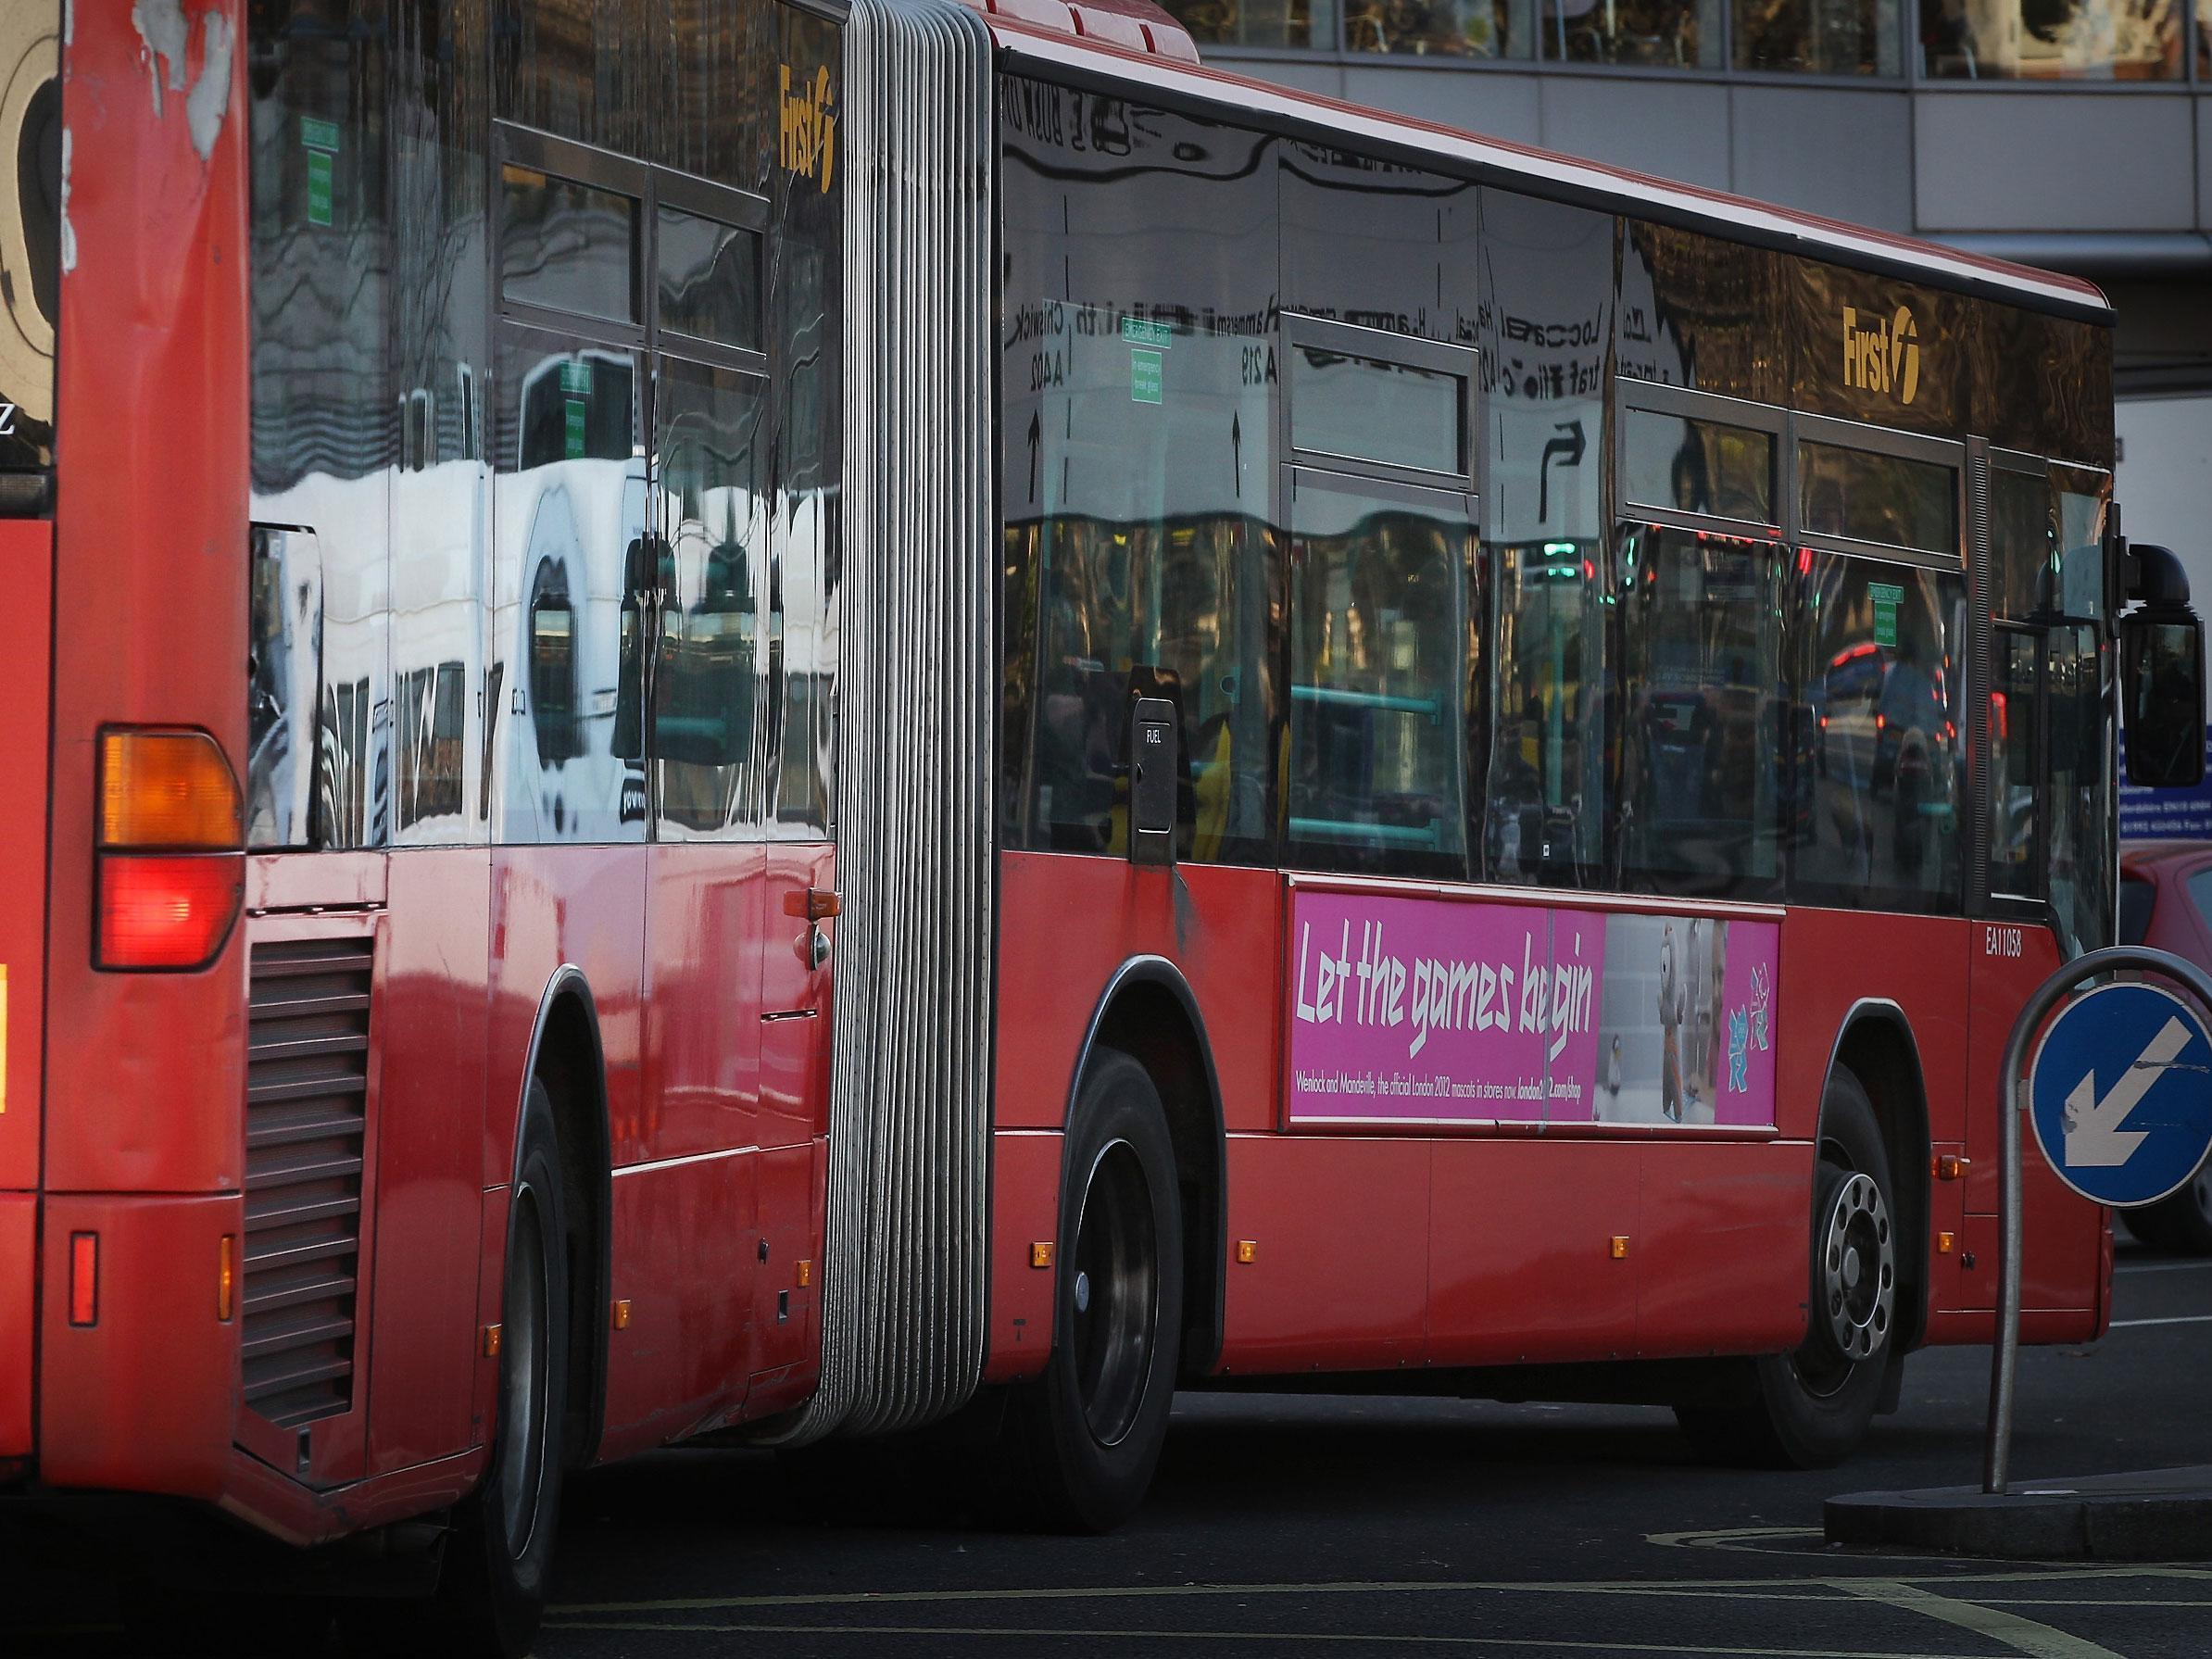 Bendy buses were last seen on the capital's streets in 2011